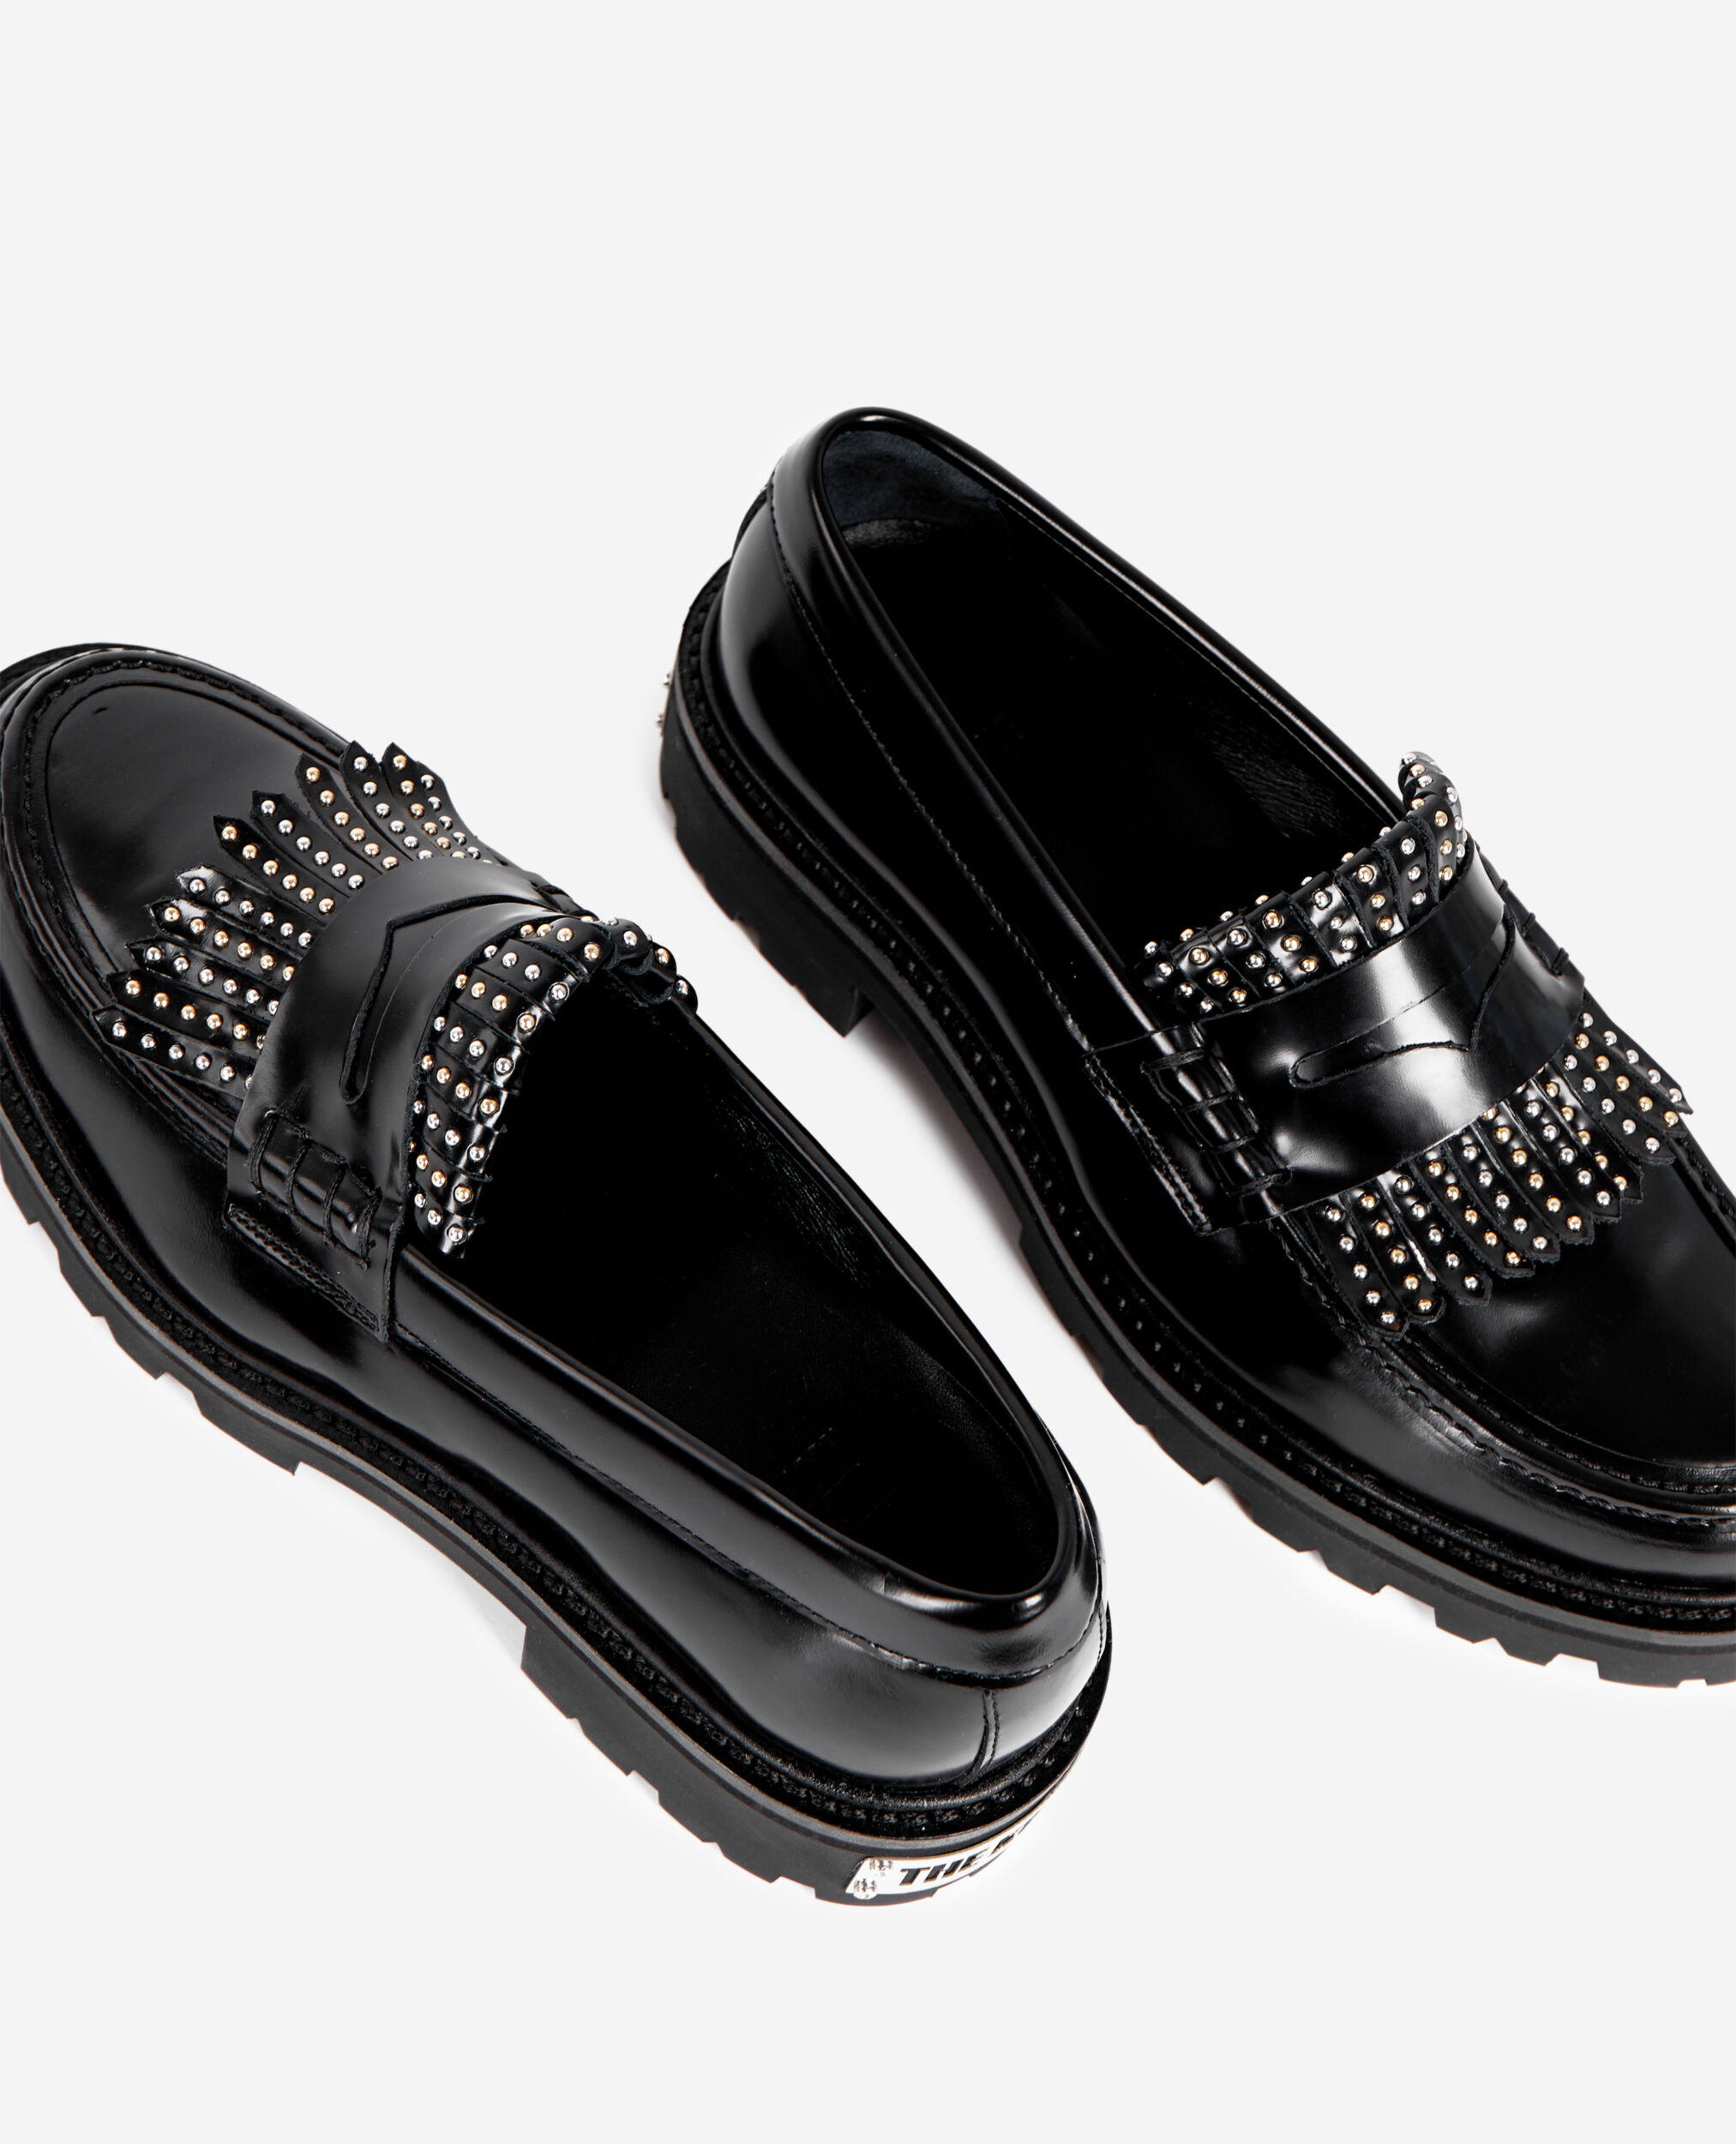 Penny loafers in black leather with fringes and studs, BLACK, hi-res image number null